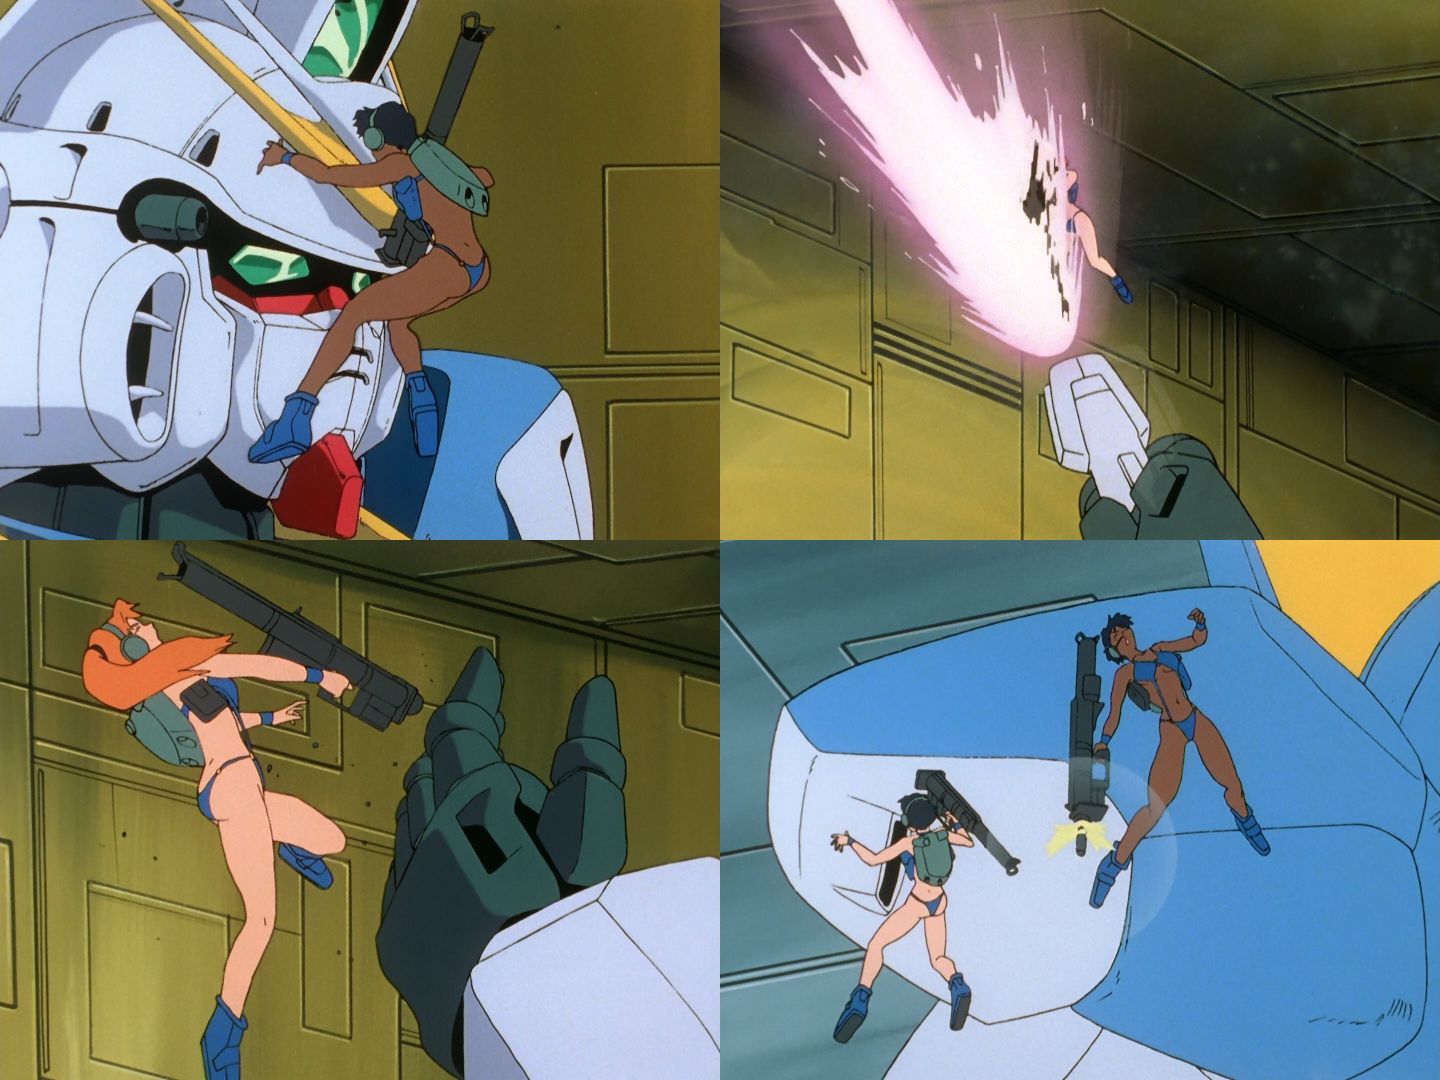 Gundam, even though it is a war thing, there is no depiction of rape at all... 15